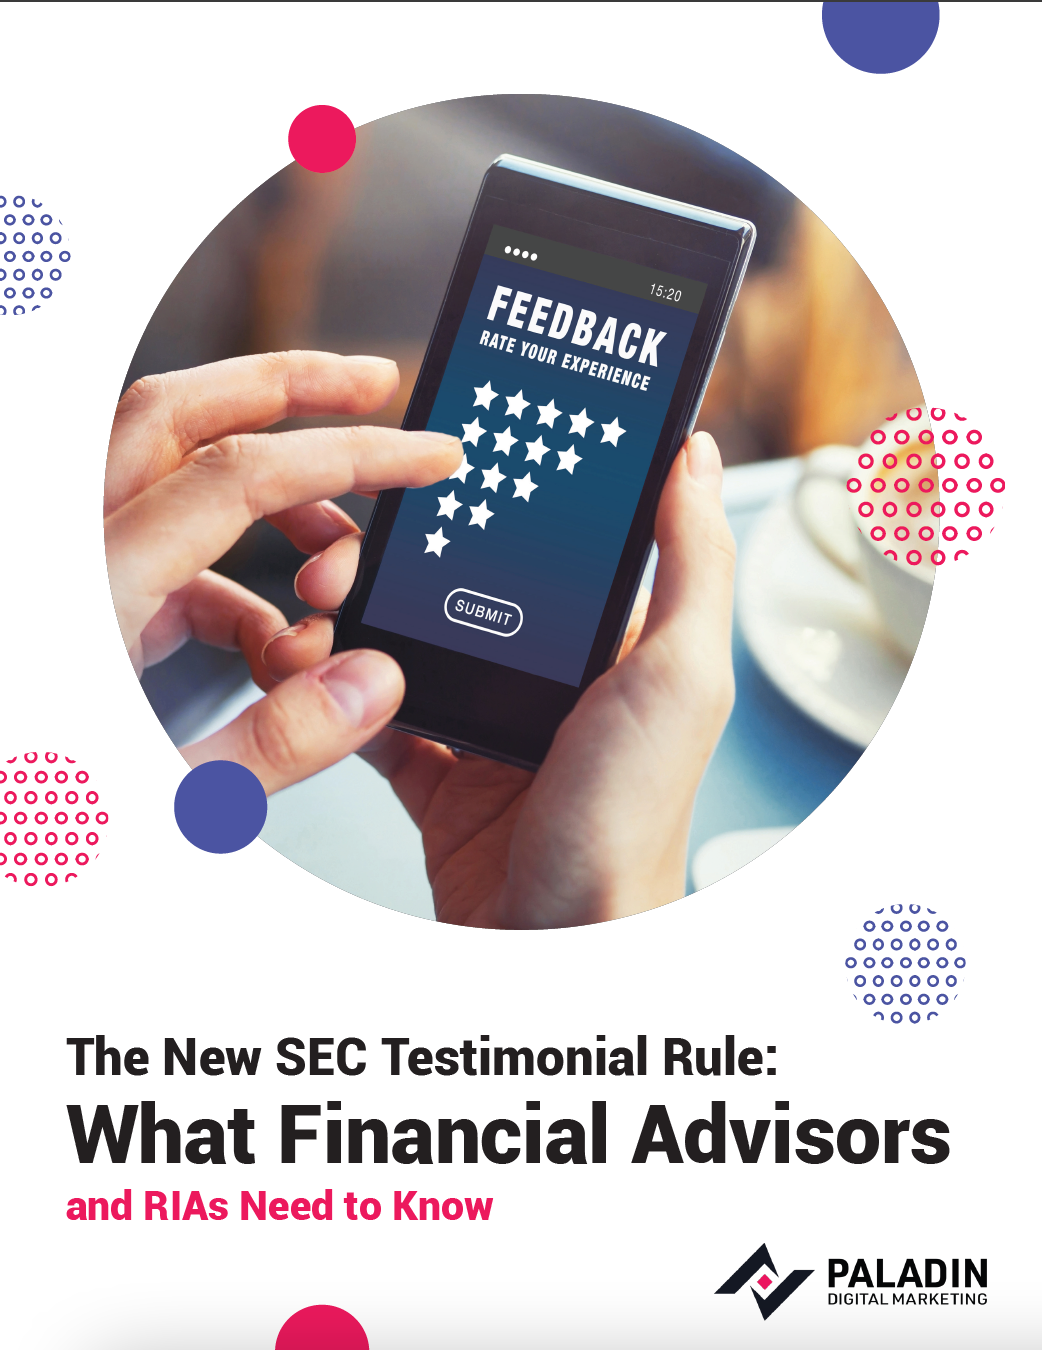 The New SEC Testimonial Rule: What Financial Advisors and RIAS Need To Know